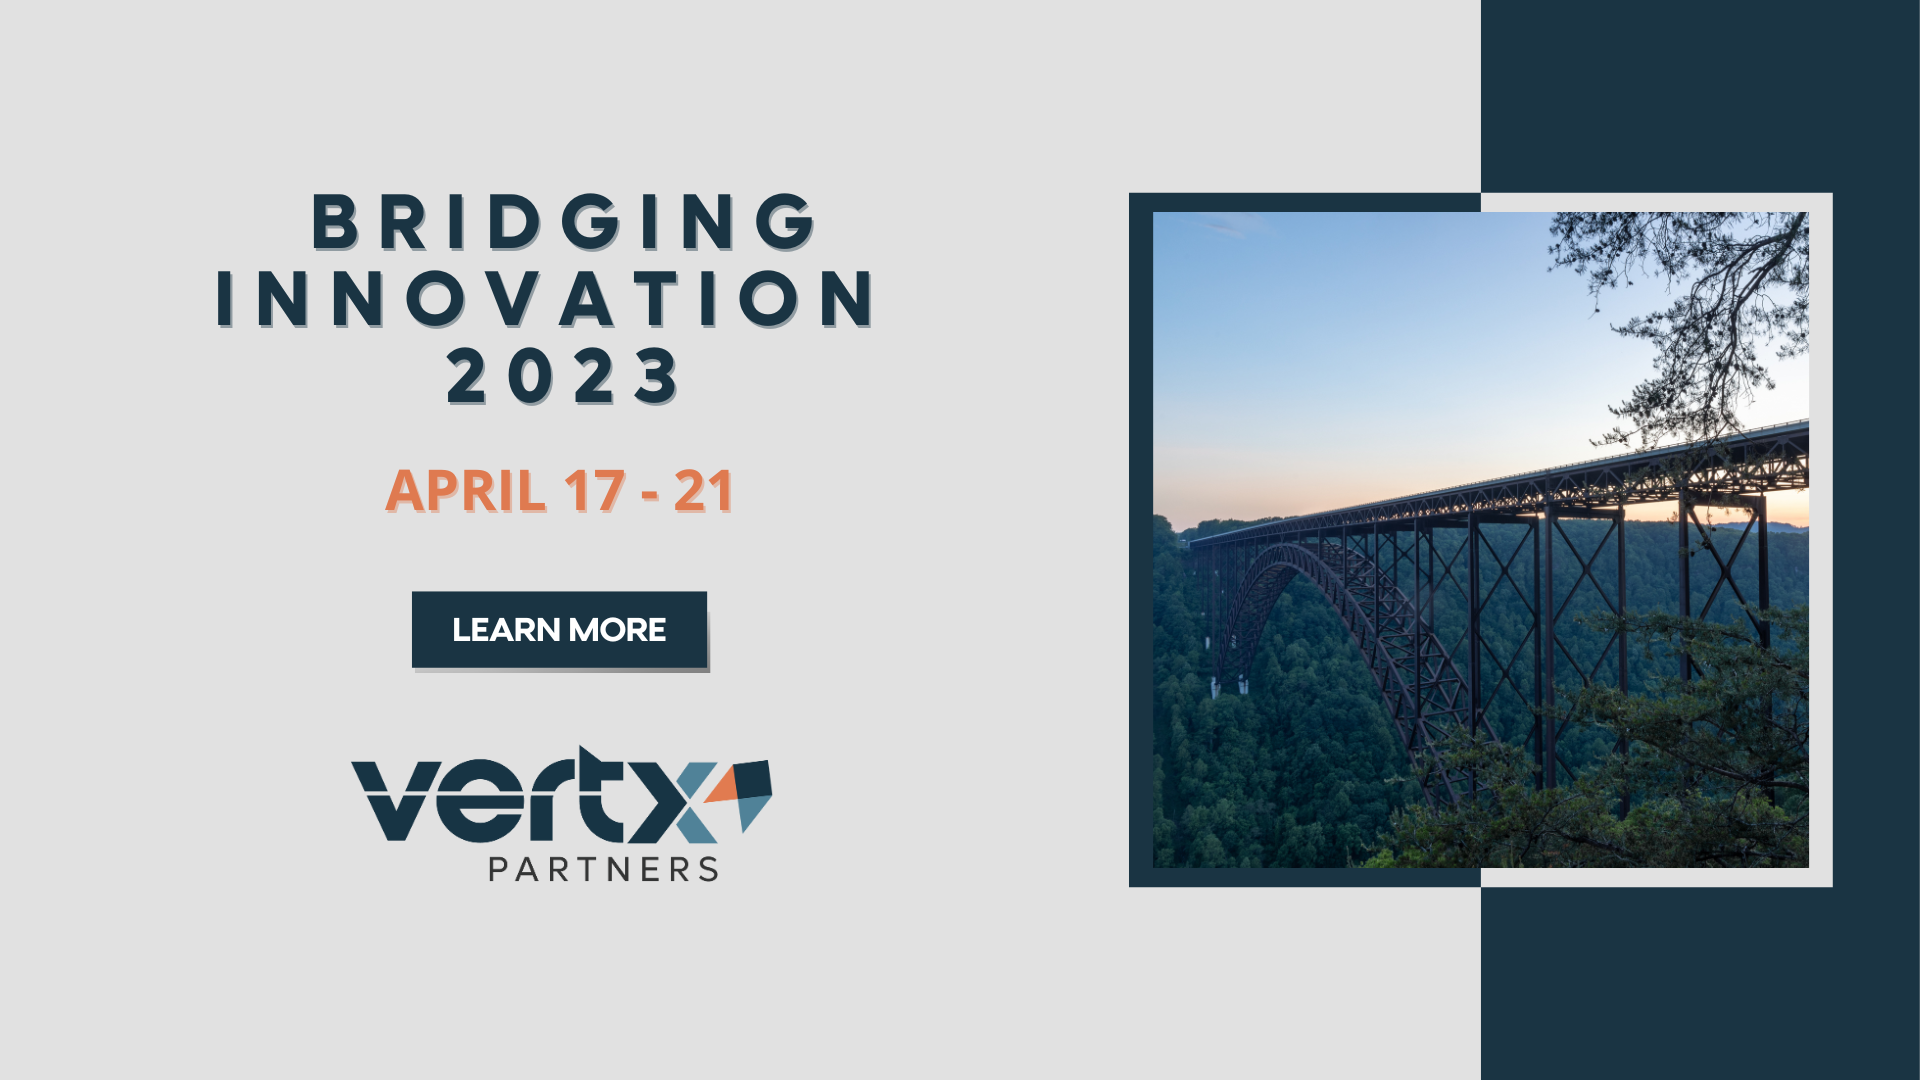 This graphic shows the title "bridging innovation 2023" with the dates April 17th - 21st. To the right of the title is a photo of a bridge with a sunset in the behind it.